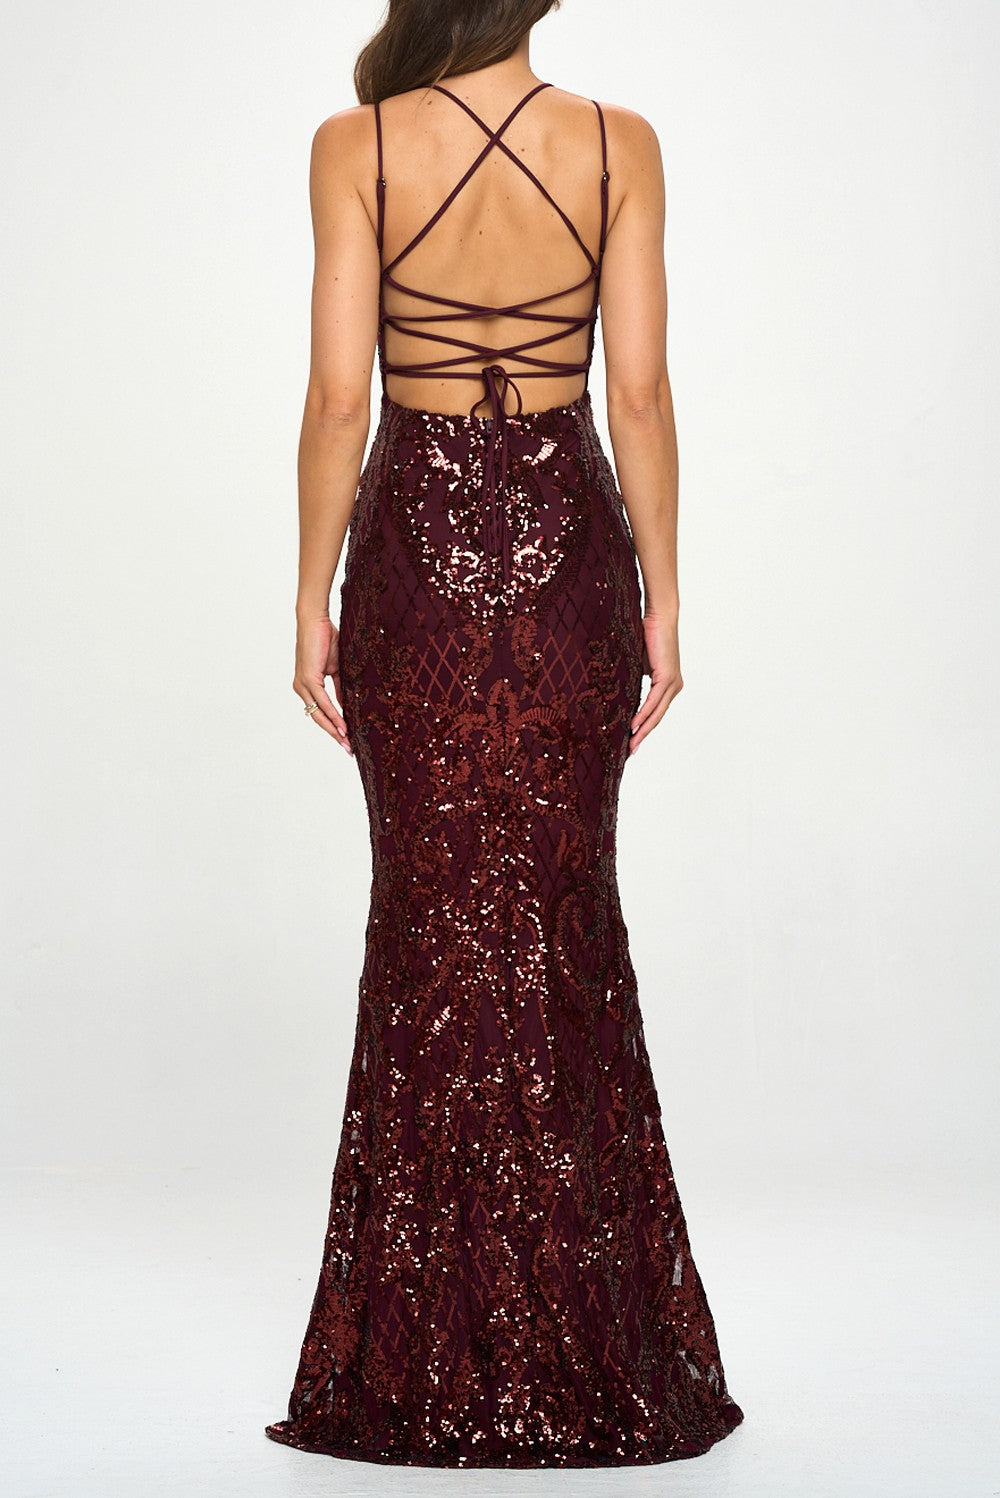 MOIRA SEQUIN GOWN